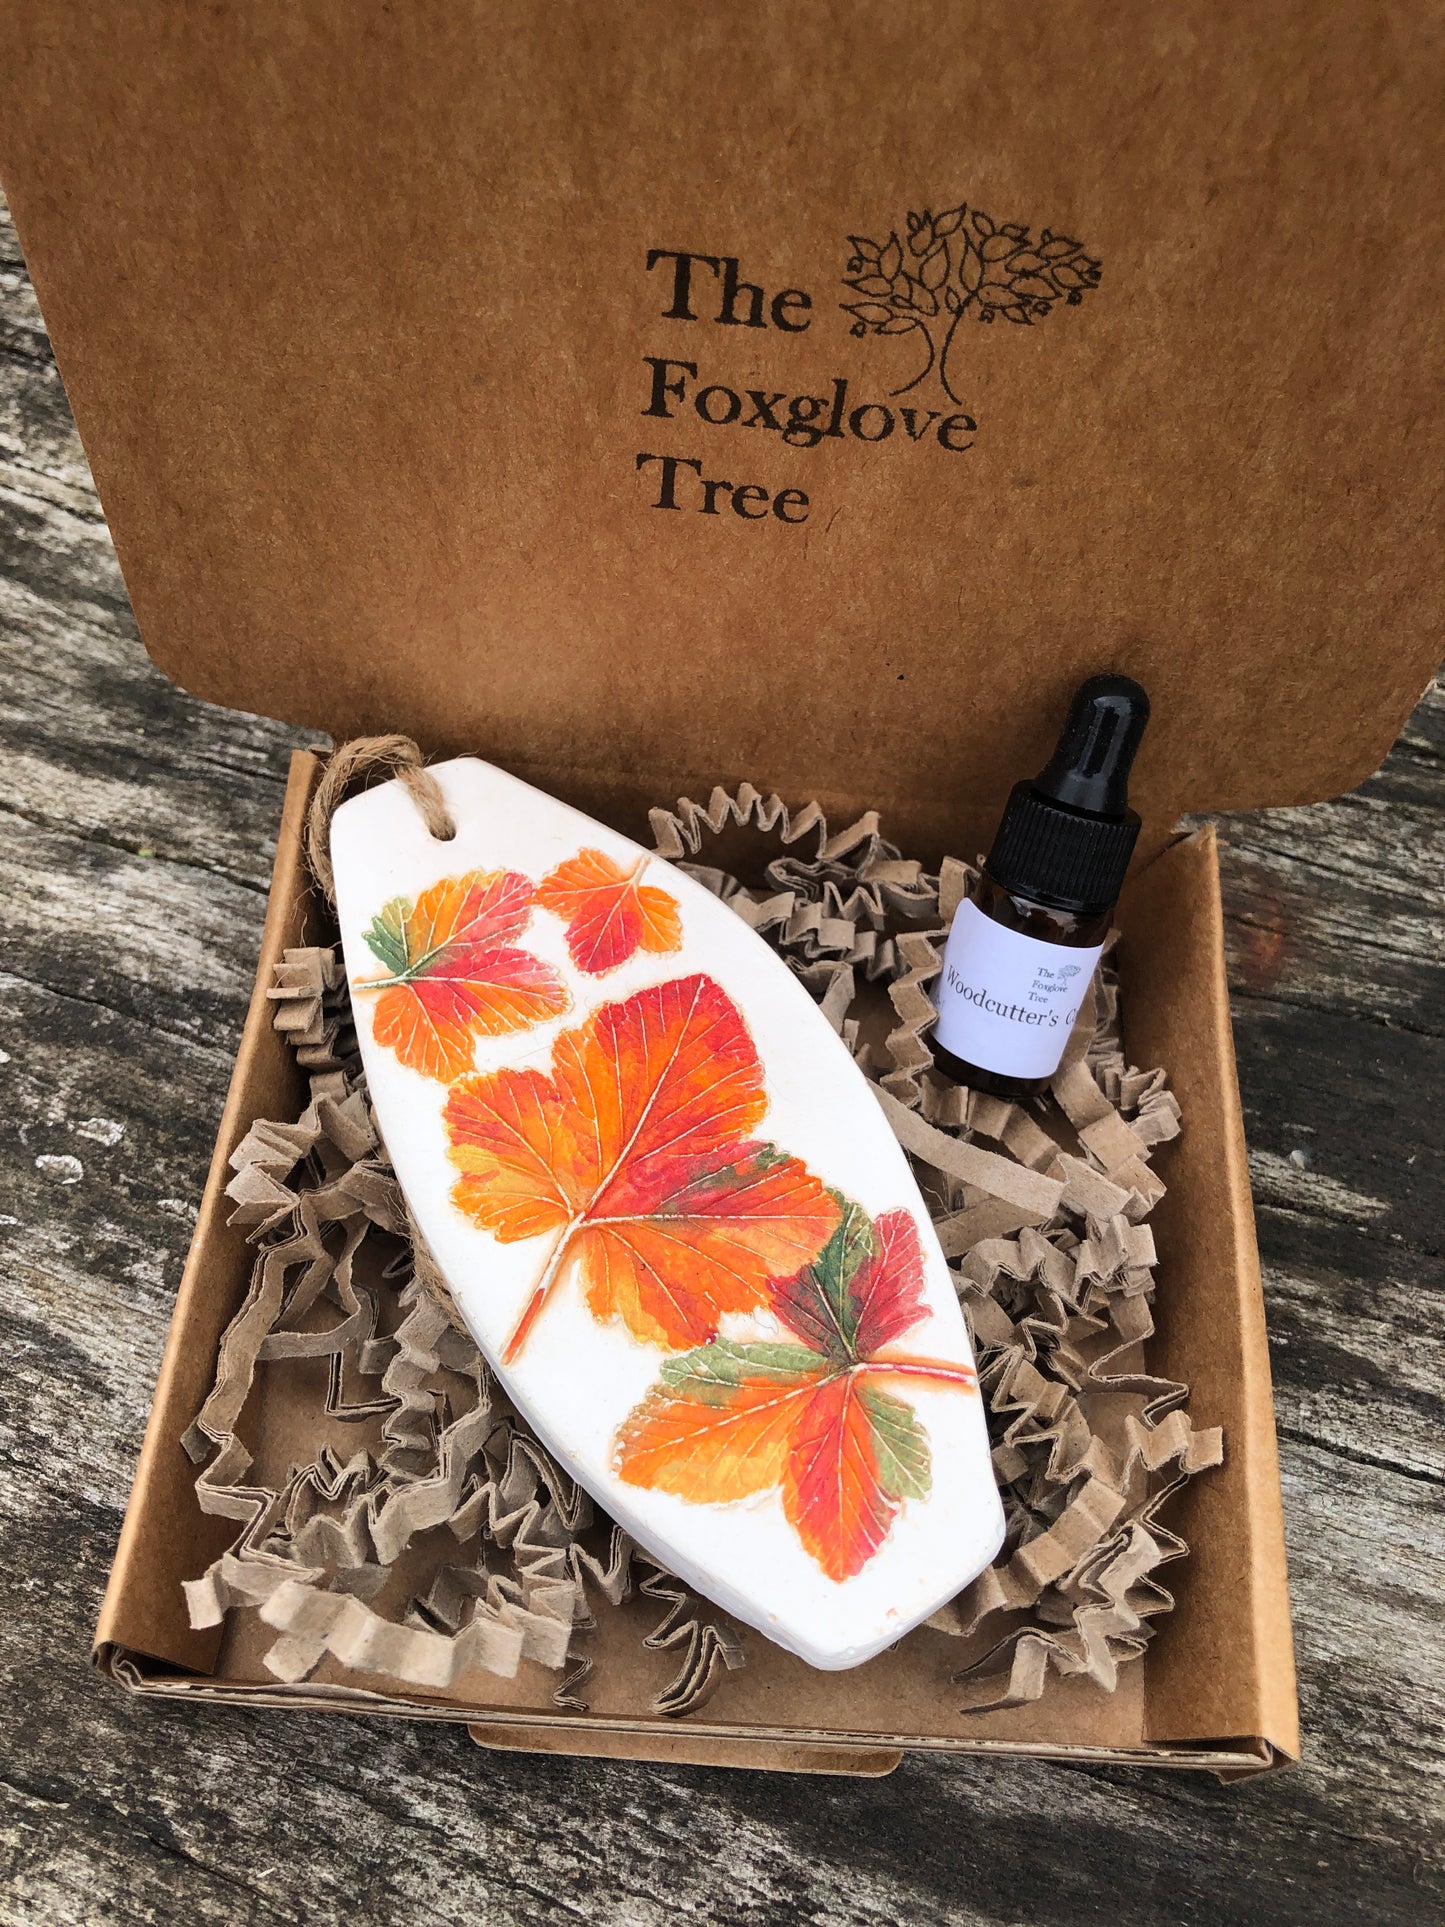 Autumn Leaves Botanical Cast Fragrance Diffuser Painted